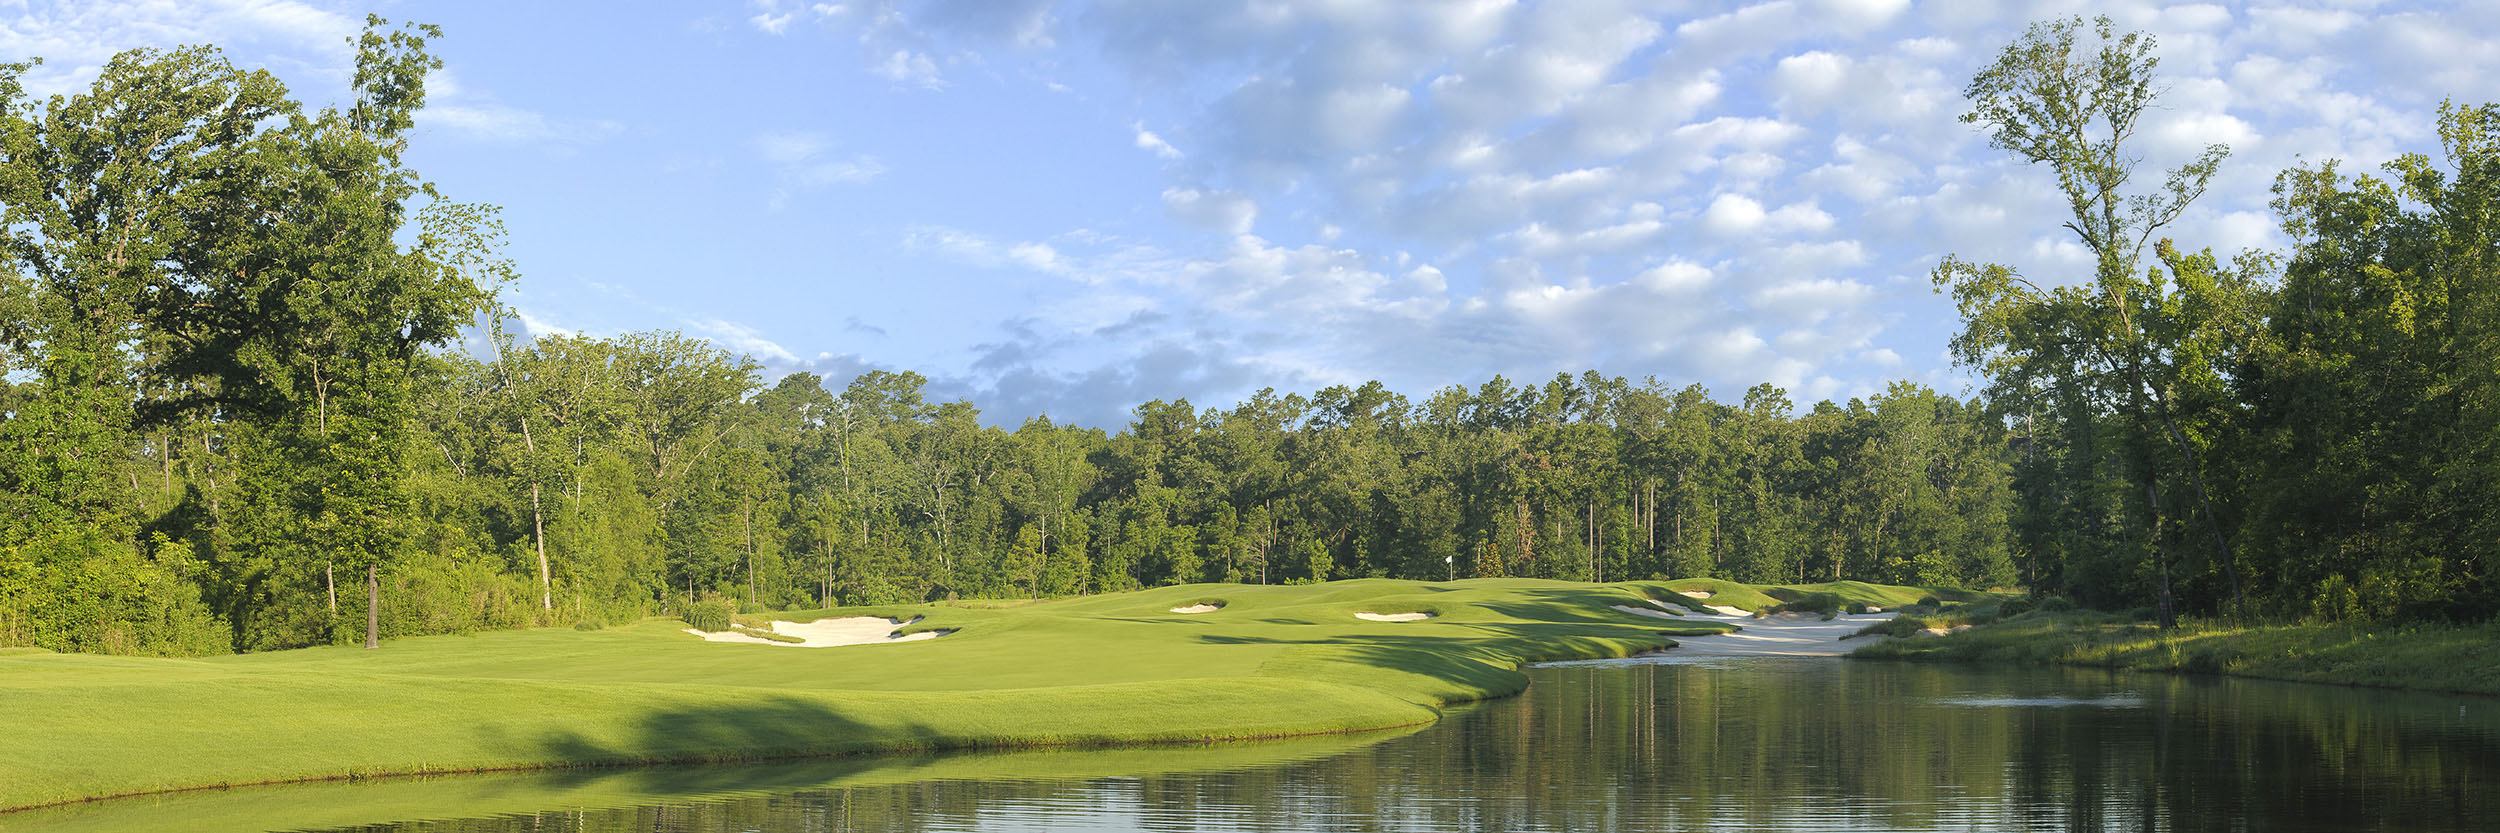 Whispering Pines Needler Course No 4